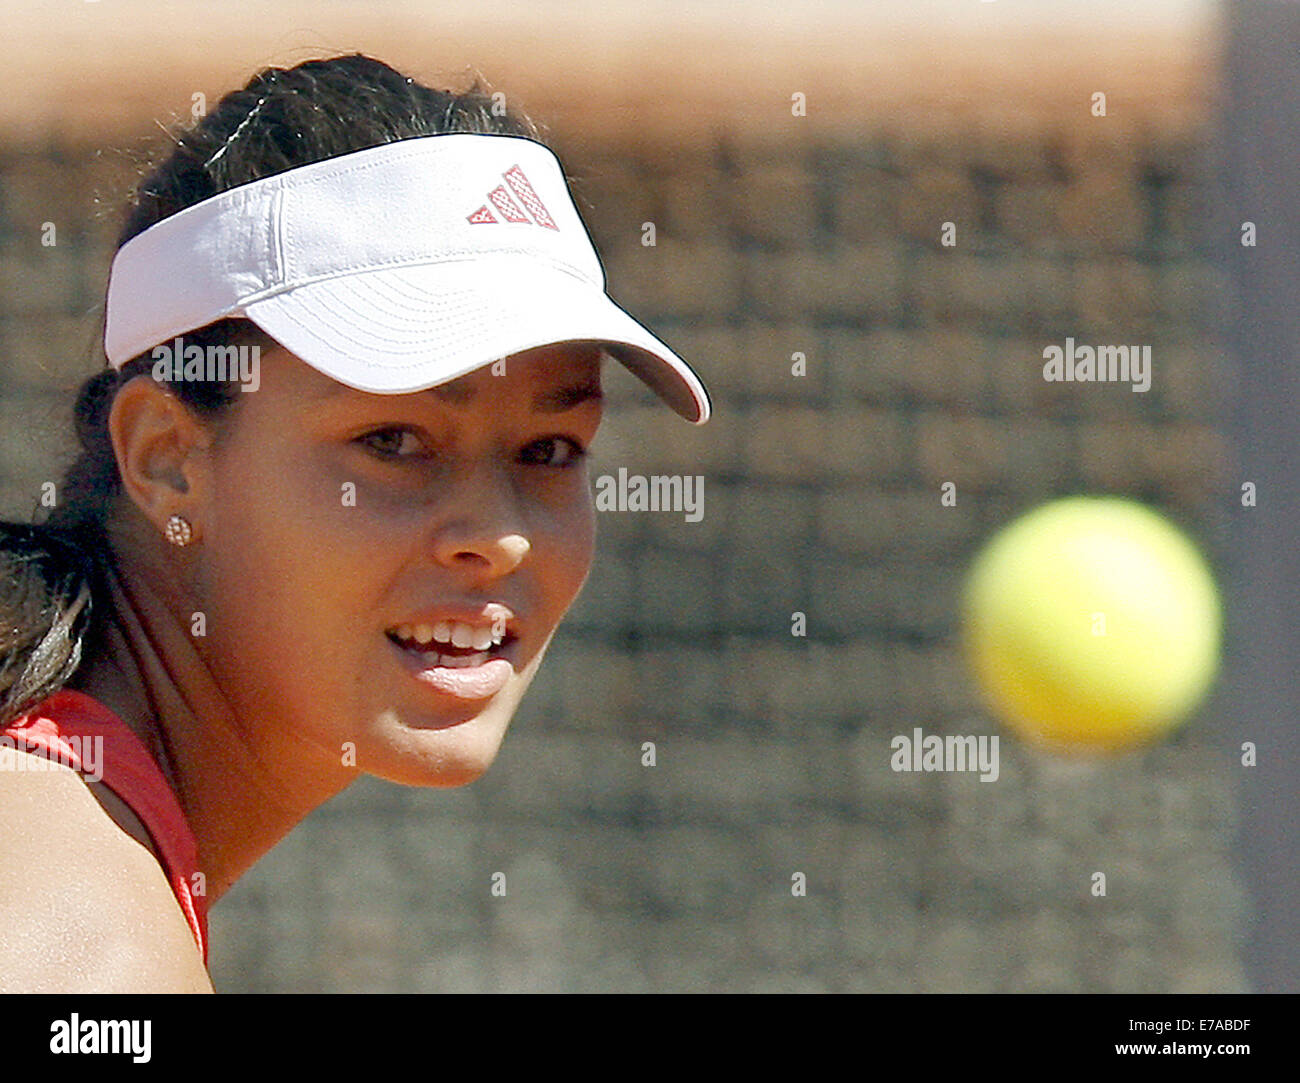 Berlin, Germany. 09th May, 2008. Ana Ivanovic of Serbia returns a backhand to Agnes Szavay of Hungary in their WTA German Open quarter-finals match in Berlin, Germany, 09 May 2008. Photo: Wolfgang Kumm/dpa/Alamy Live News Stock Photo